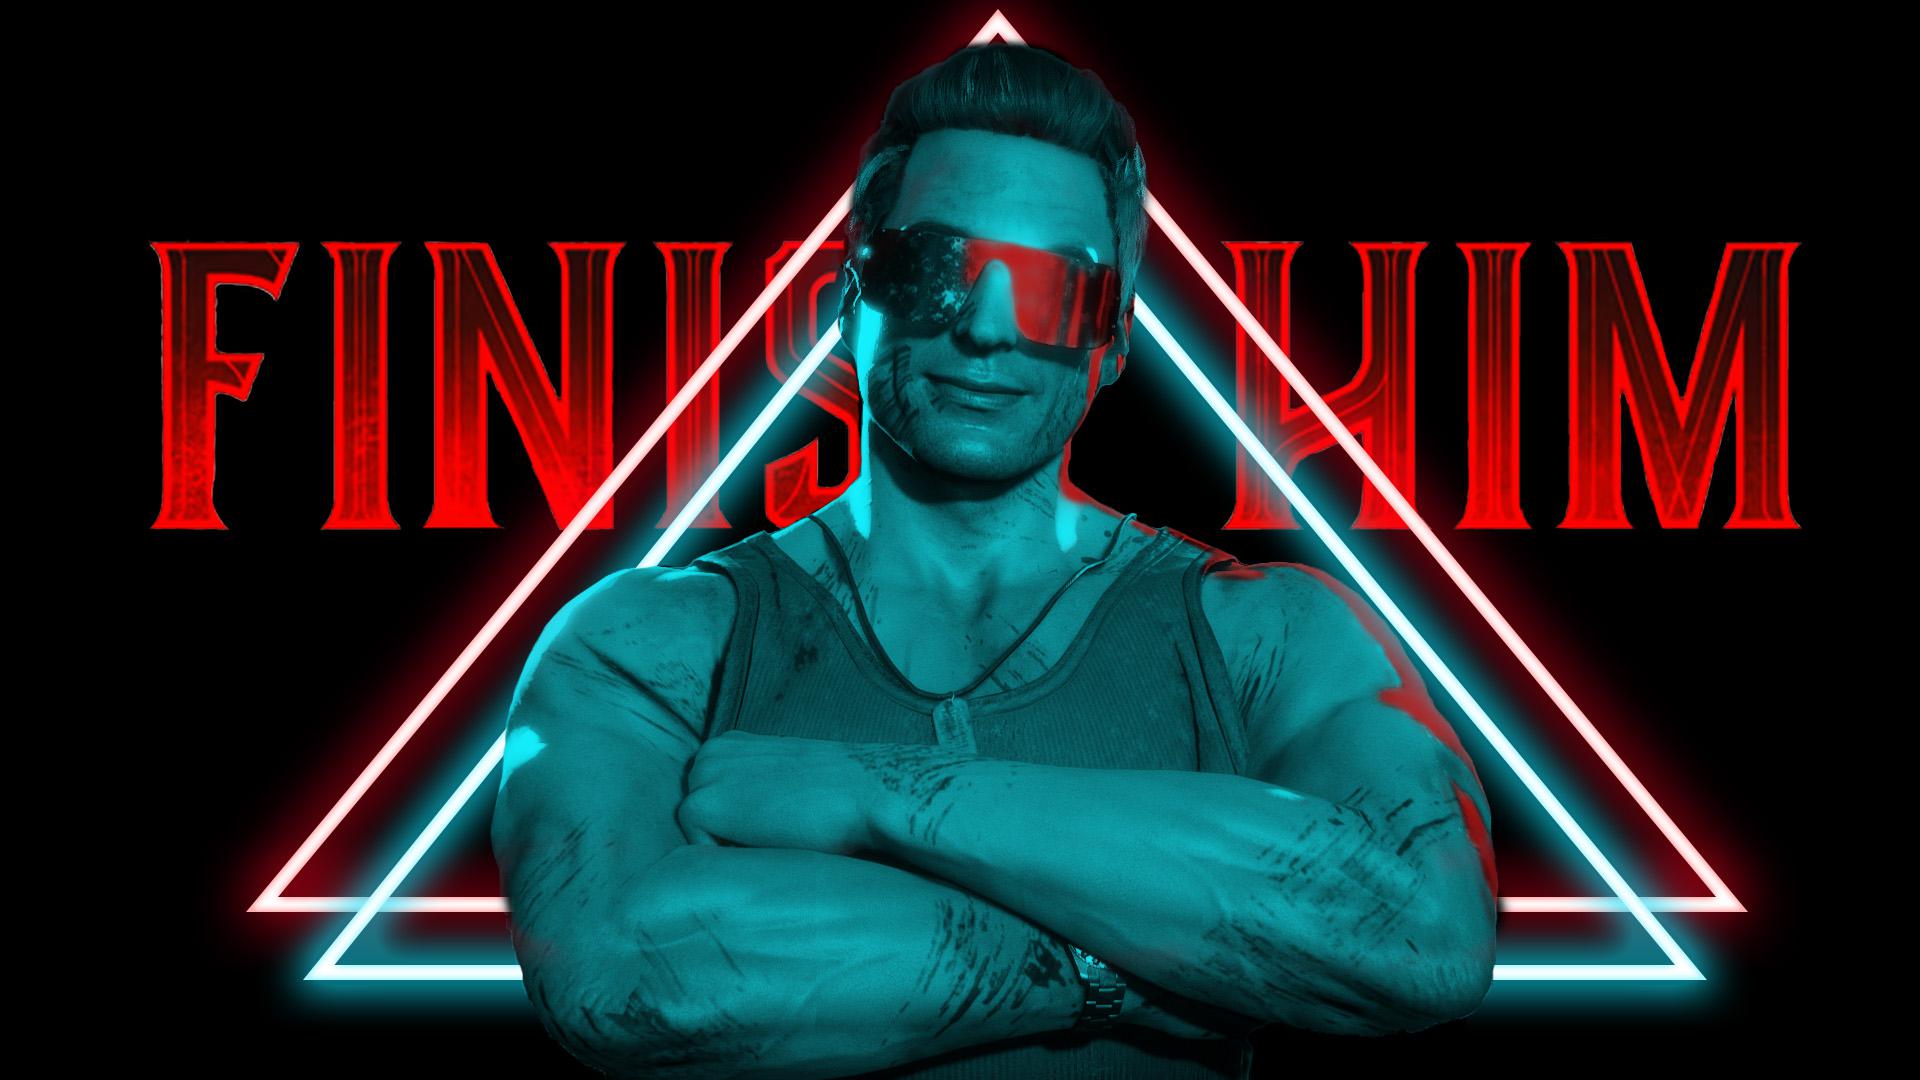 Johnny Cage is awesome, here is my attempt at an artwork dedicated to JC